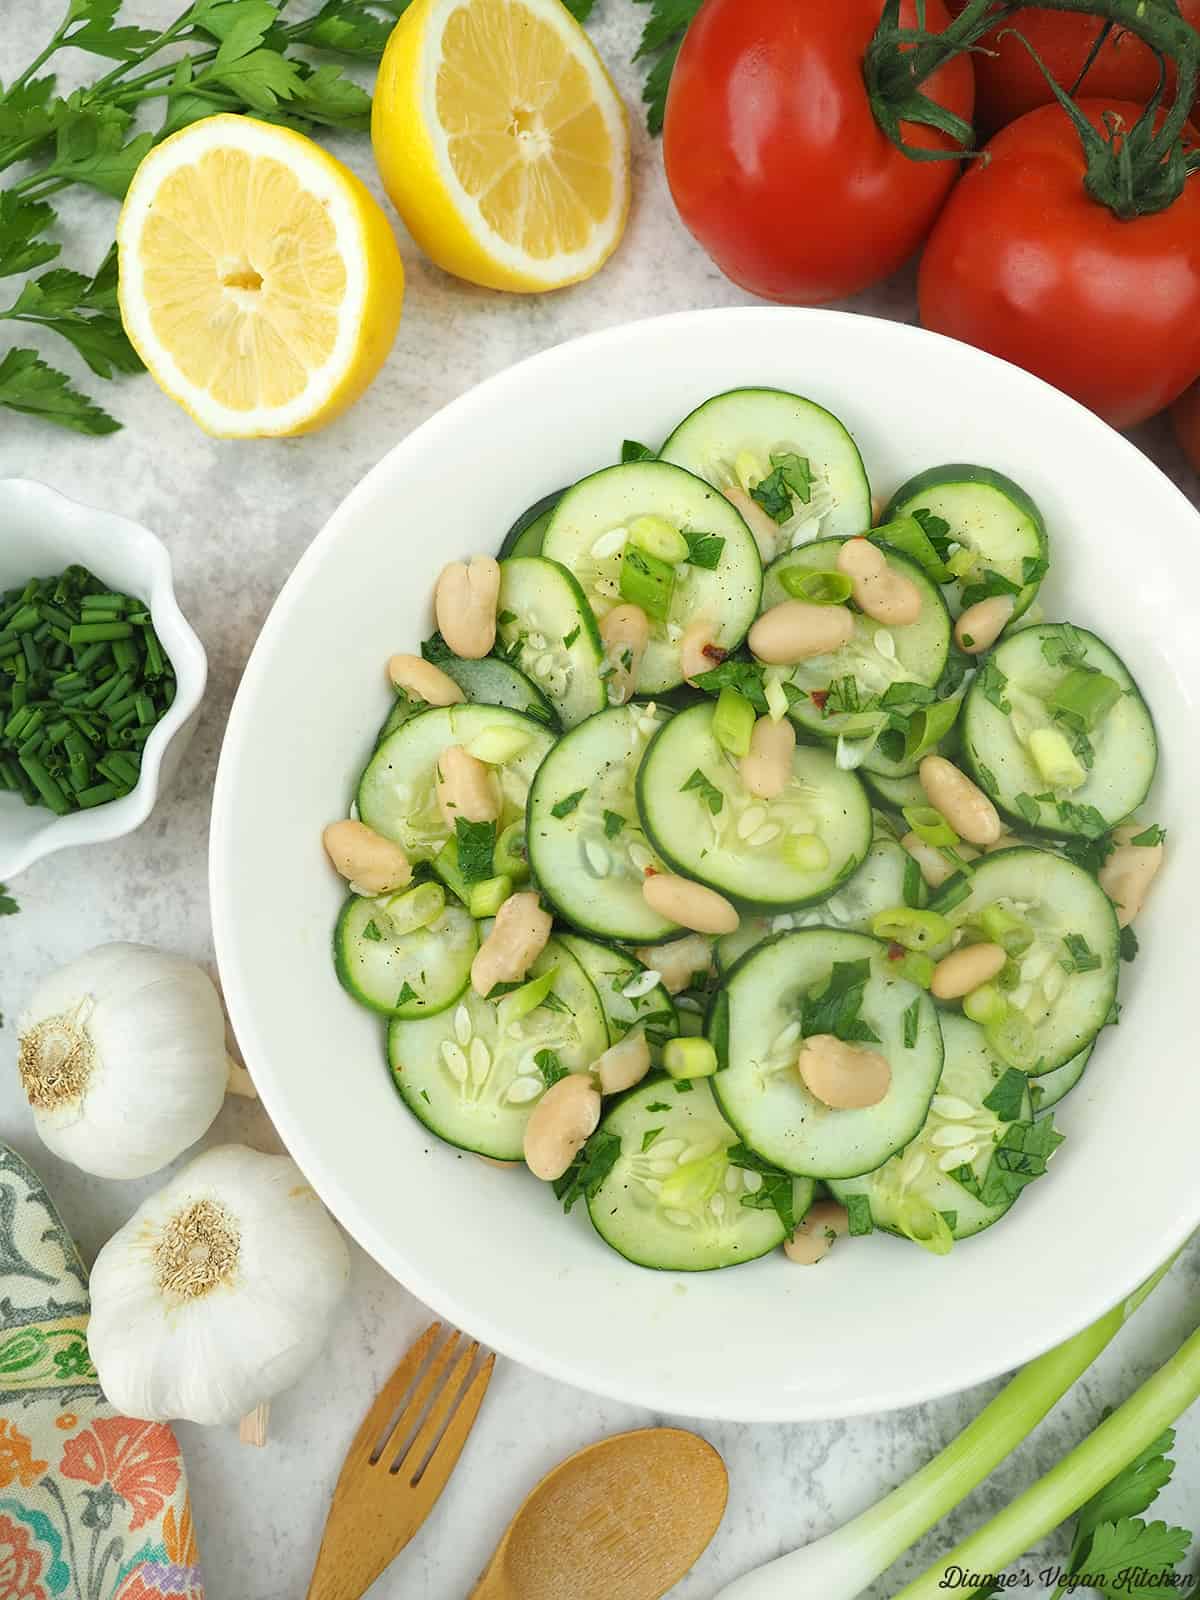 cucumber salad in a bowl surrounded by lemons, tomatoes, chives, garlic, a fork and spoon, and scallions